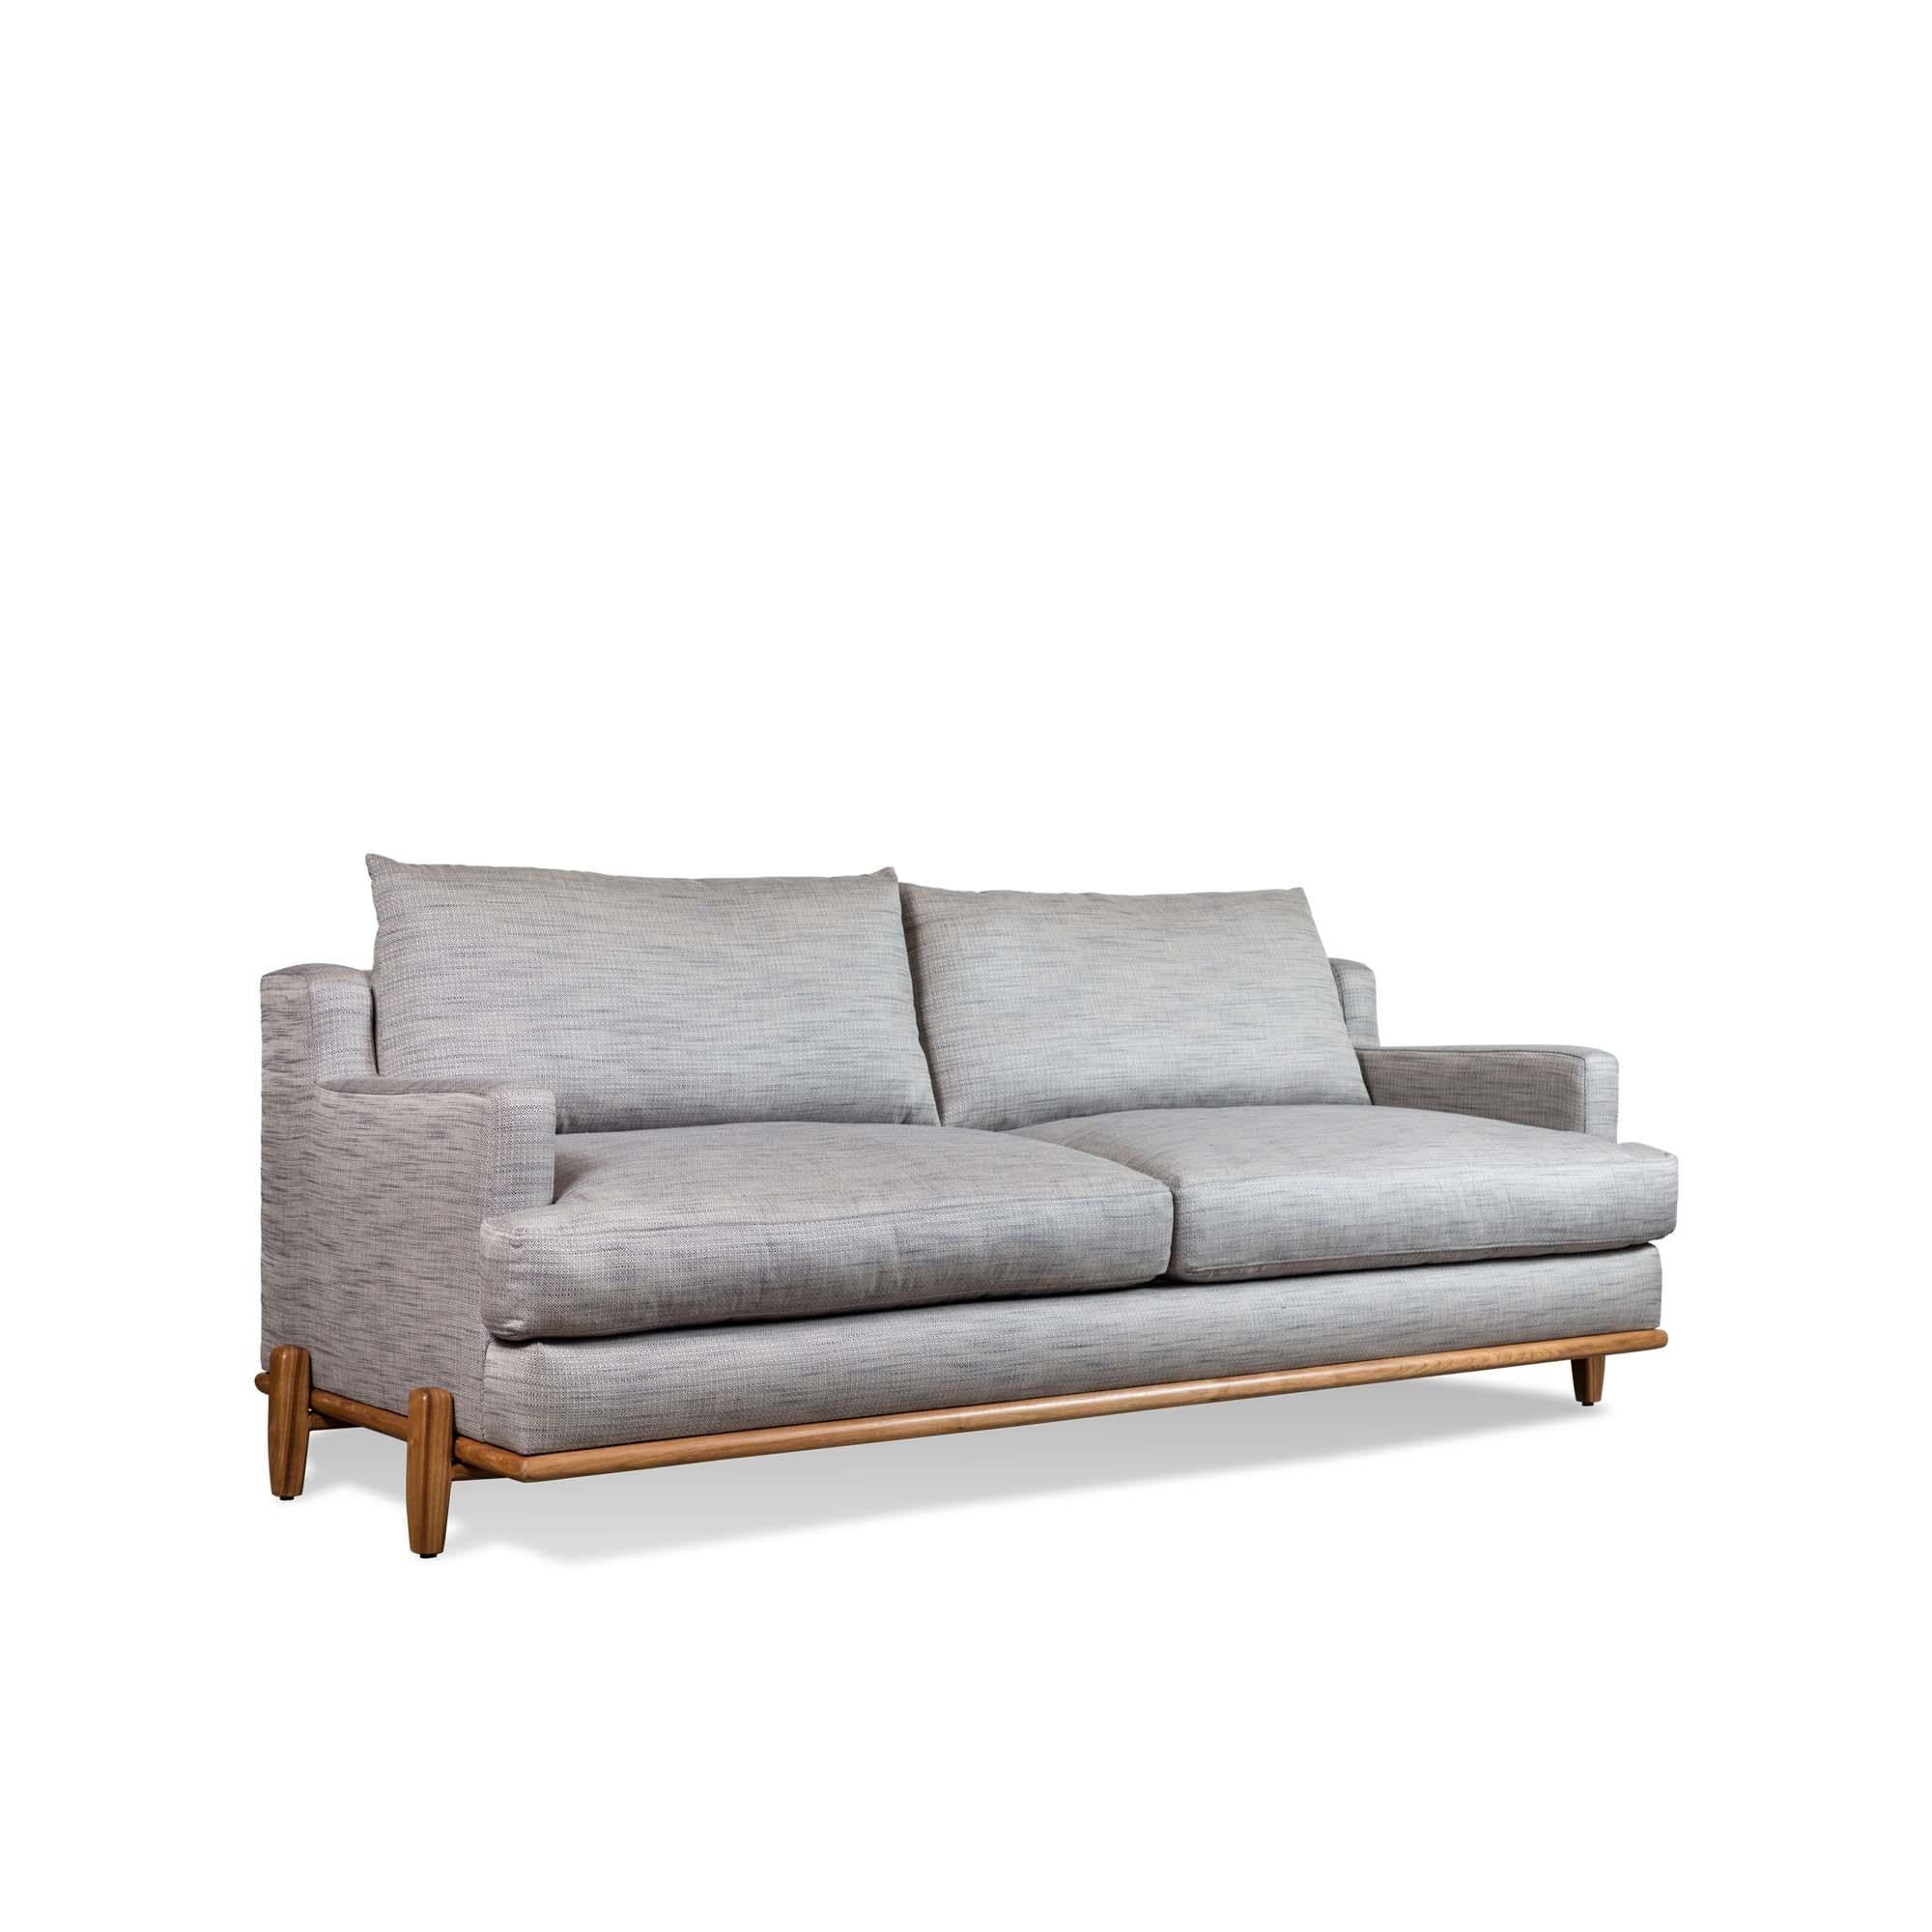 The George sofa is part of the collaborative collection with interior designer Brian Paquette. The low profile silhouette sits above a sculpted solid wood base. This piece is available in exclusive BP for LF finishes as well as the standard